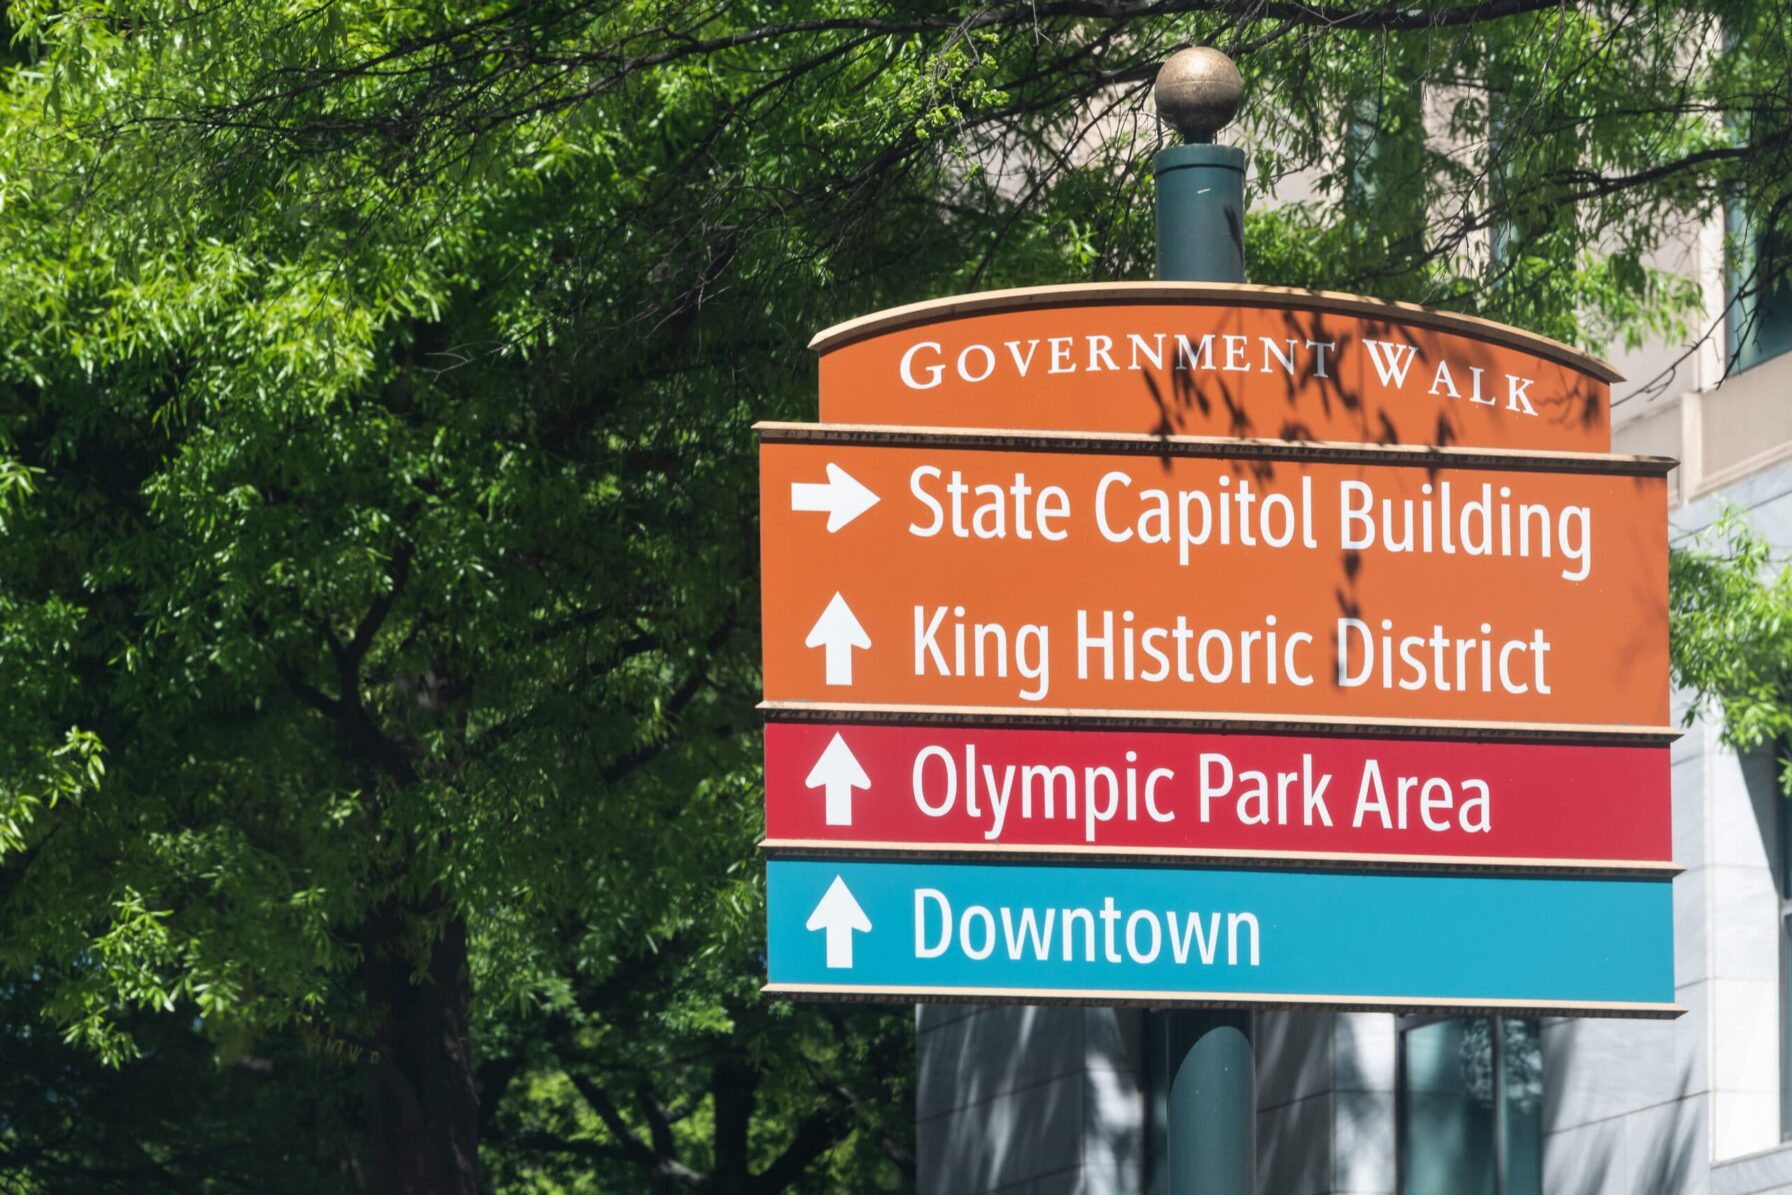 Atlanta, USA - April 20, 2018: Direction sign arrows to State Capitol Building, Government walk tour to Olympic Park area and King Historic Distrcit in downtown of Georgia city